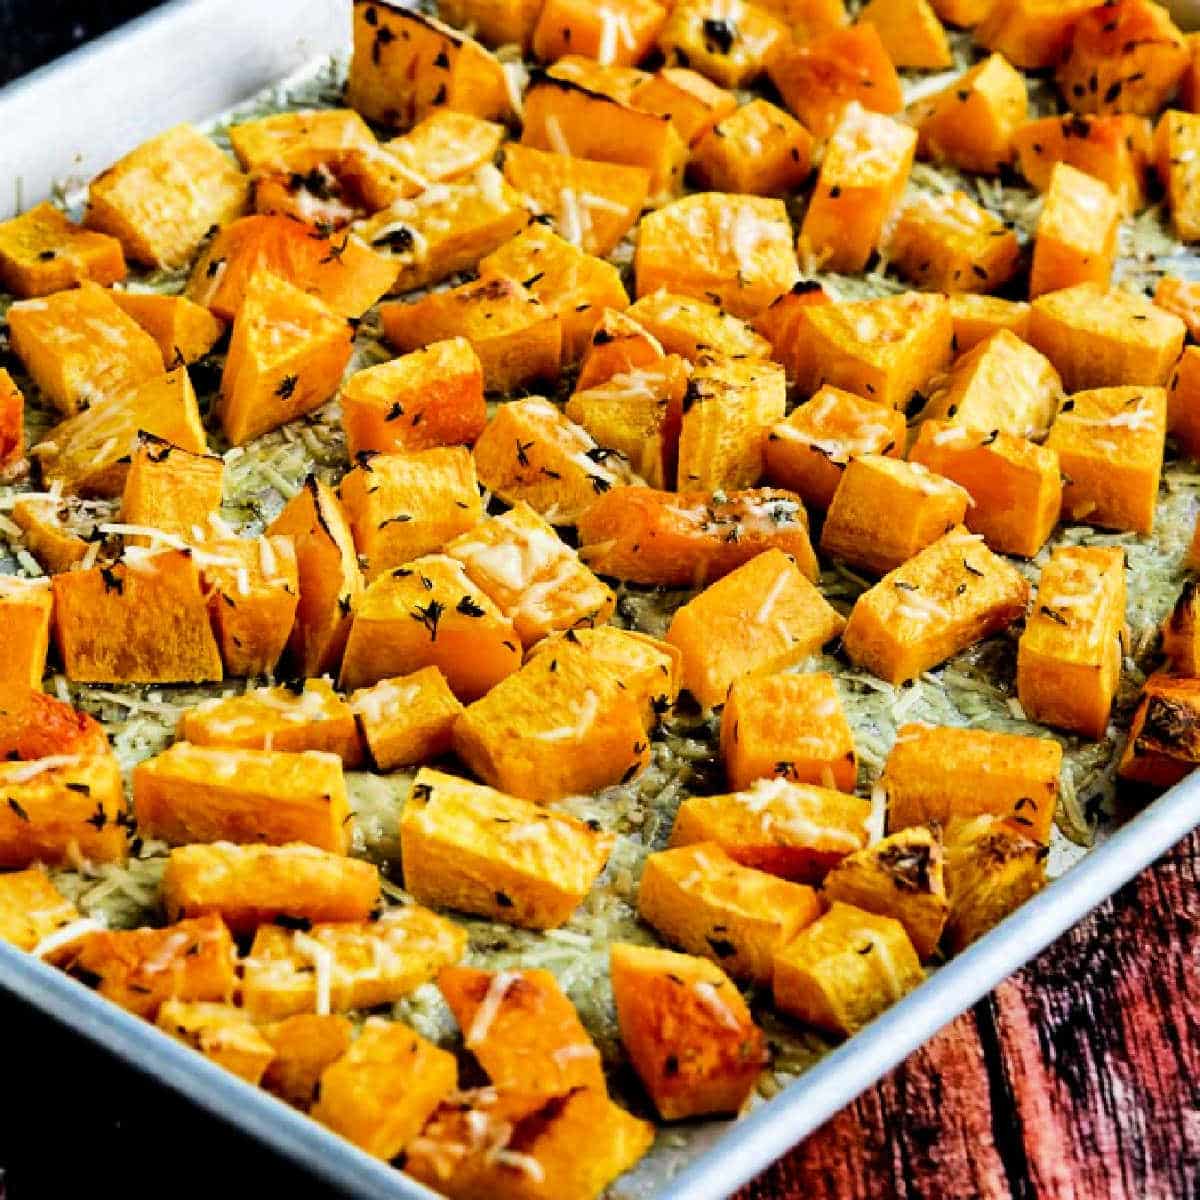 Square image for Roasted Butternut Squash with Lemon, Thyme, and Parmesan shown in baking sheet.